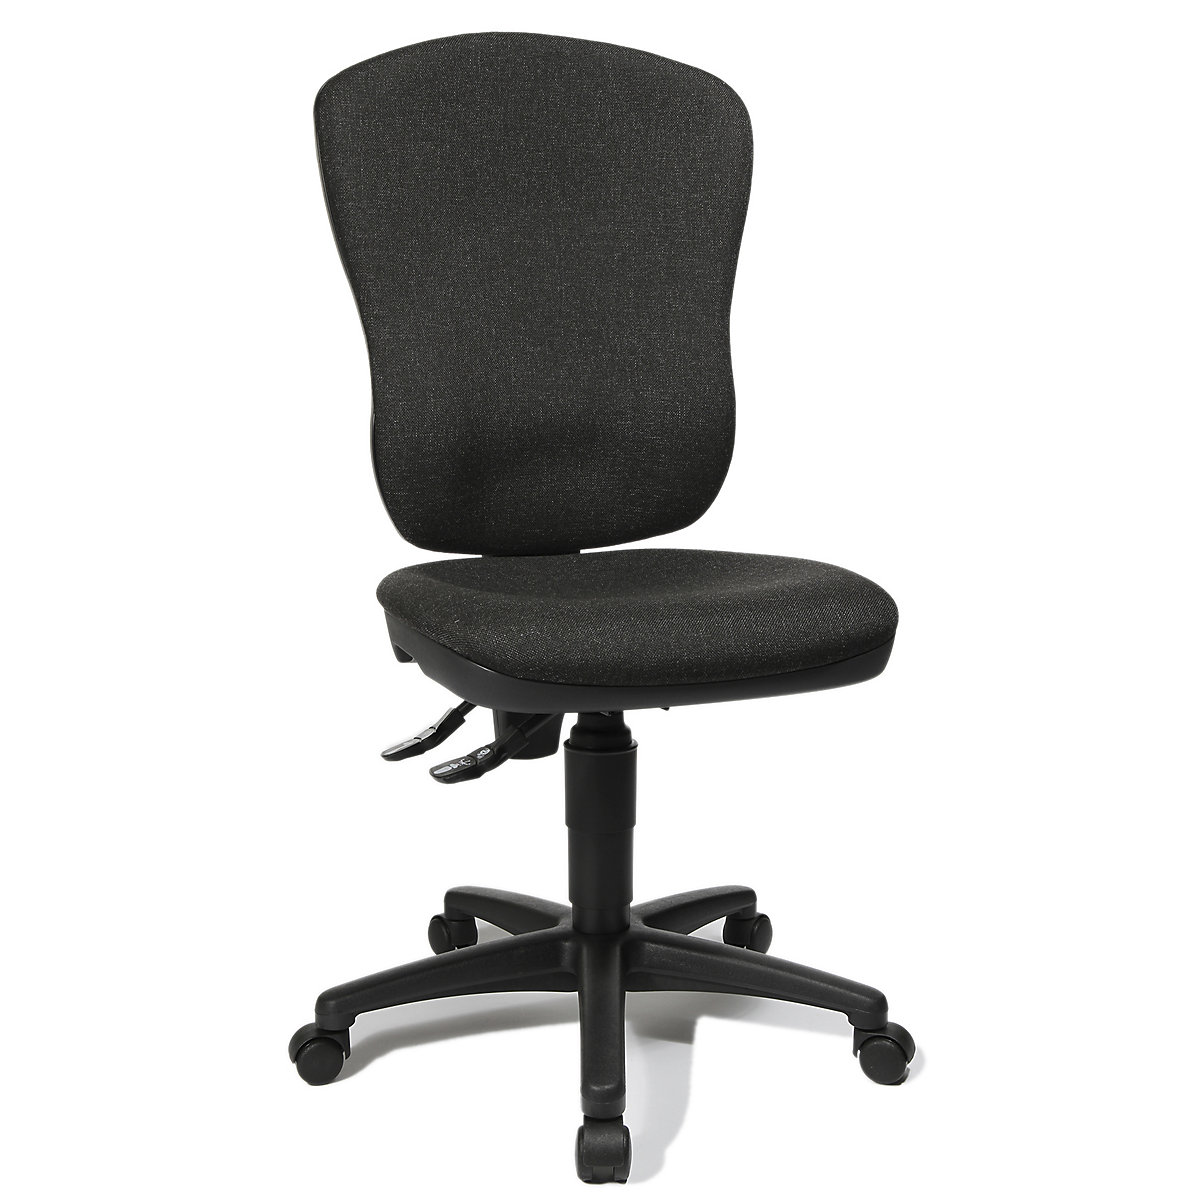 Standard swivel chair – Topstar, without arm rests, with lumbar support, back rest height 570 mm, anthracite covering-6